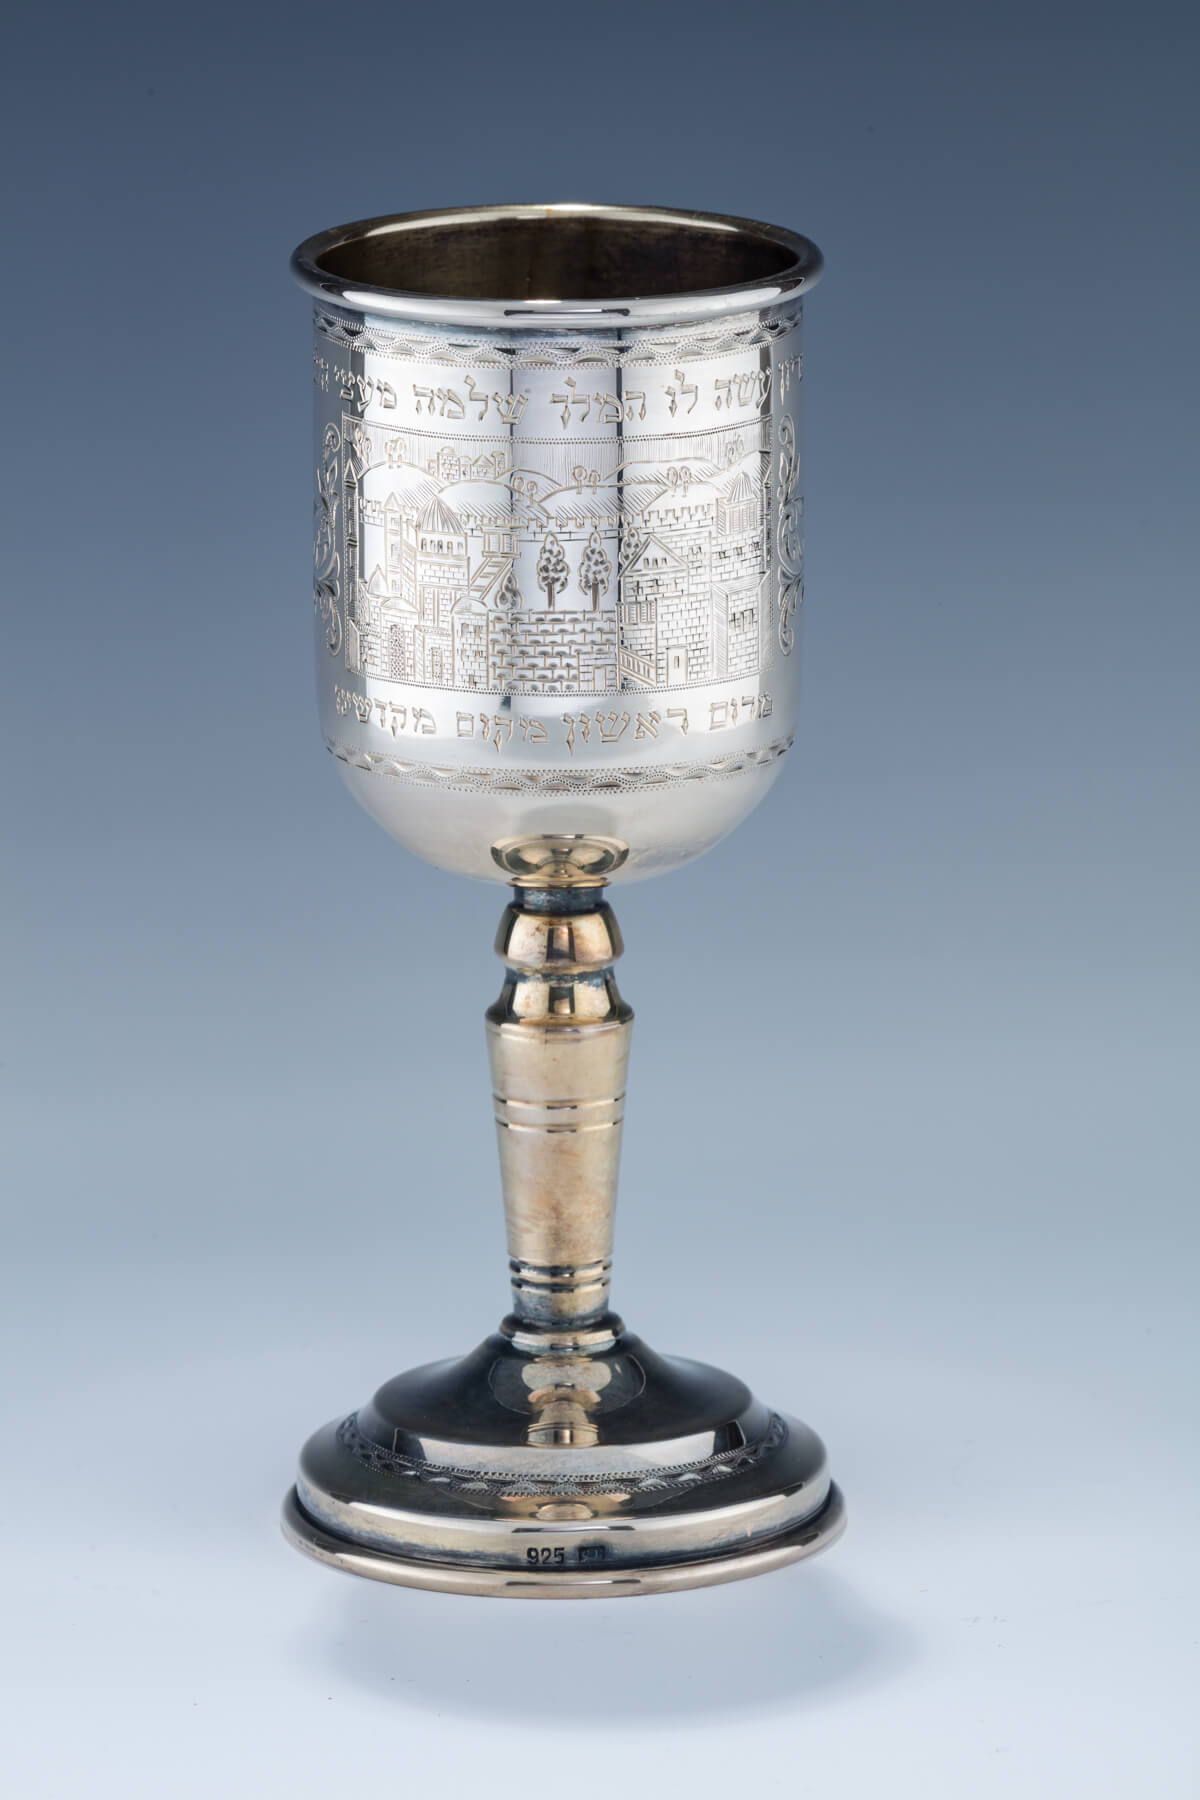 124. A Sterling Silver Kiddush Cup By Shuki Freiman